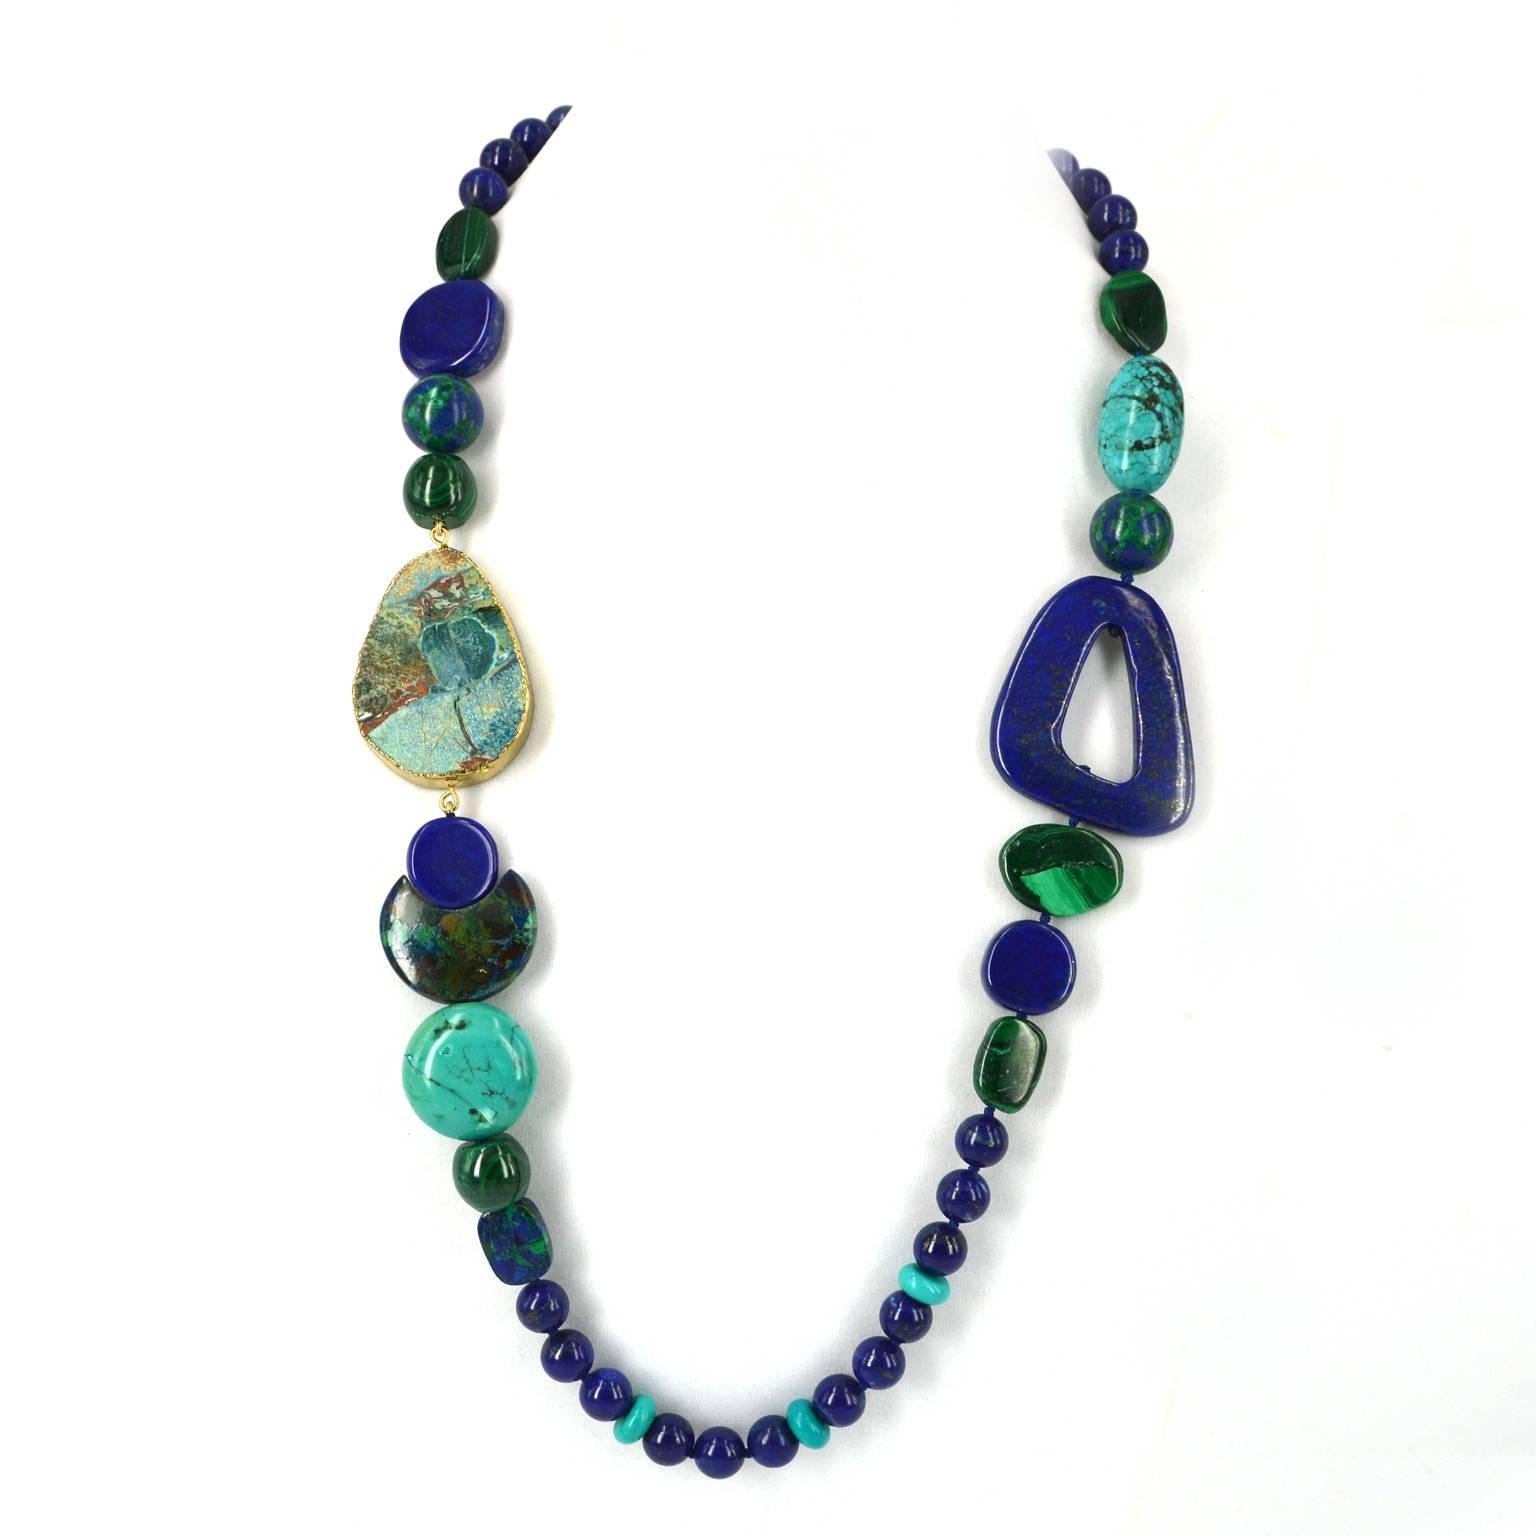 With tones of blues and green this Asymmetrical long necklace is made up of the most beautiful natural stones.
With two feature beads of Lapis and Jasper followed by high quality polished malachite and matrix turquoise with a dash of